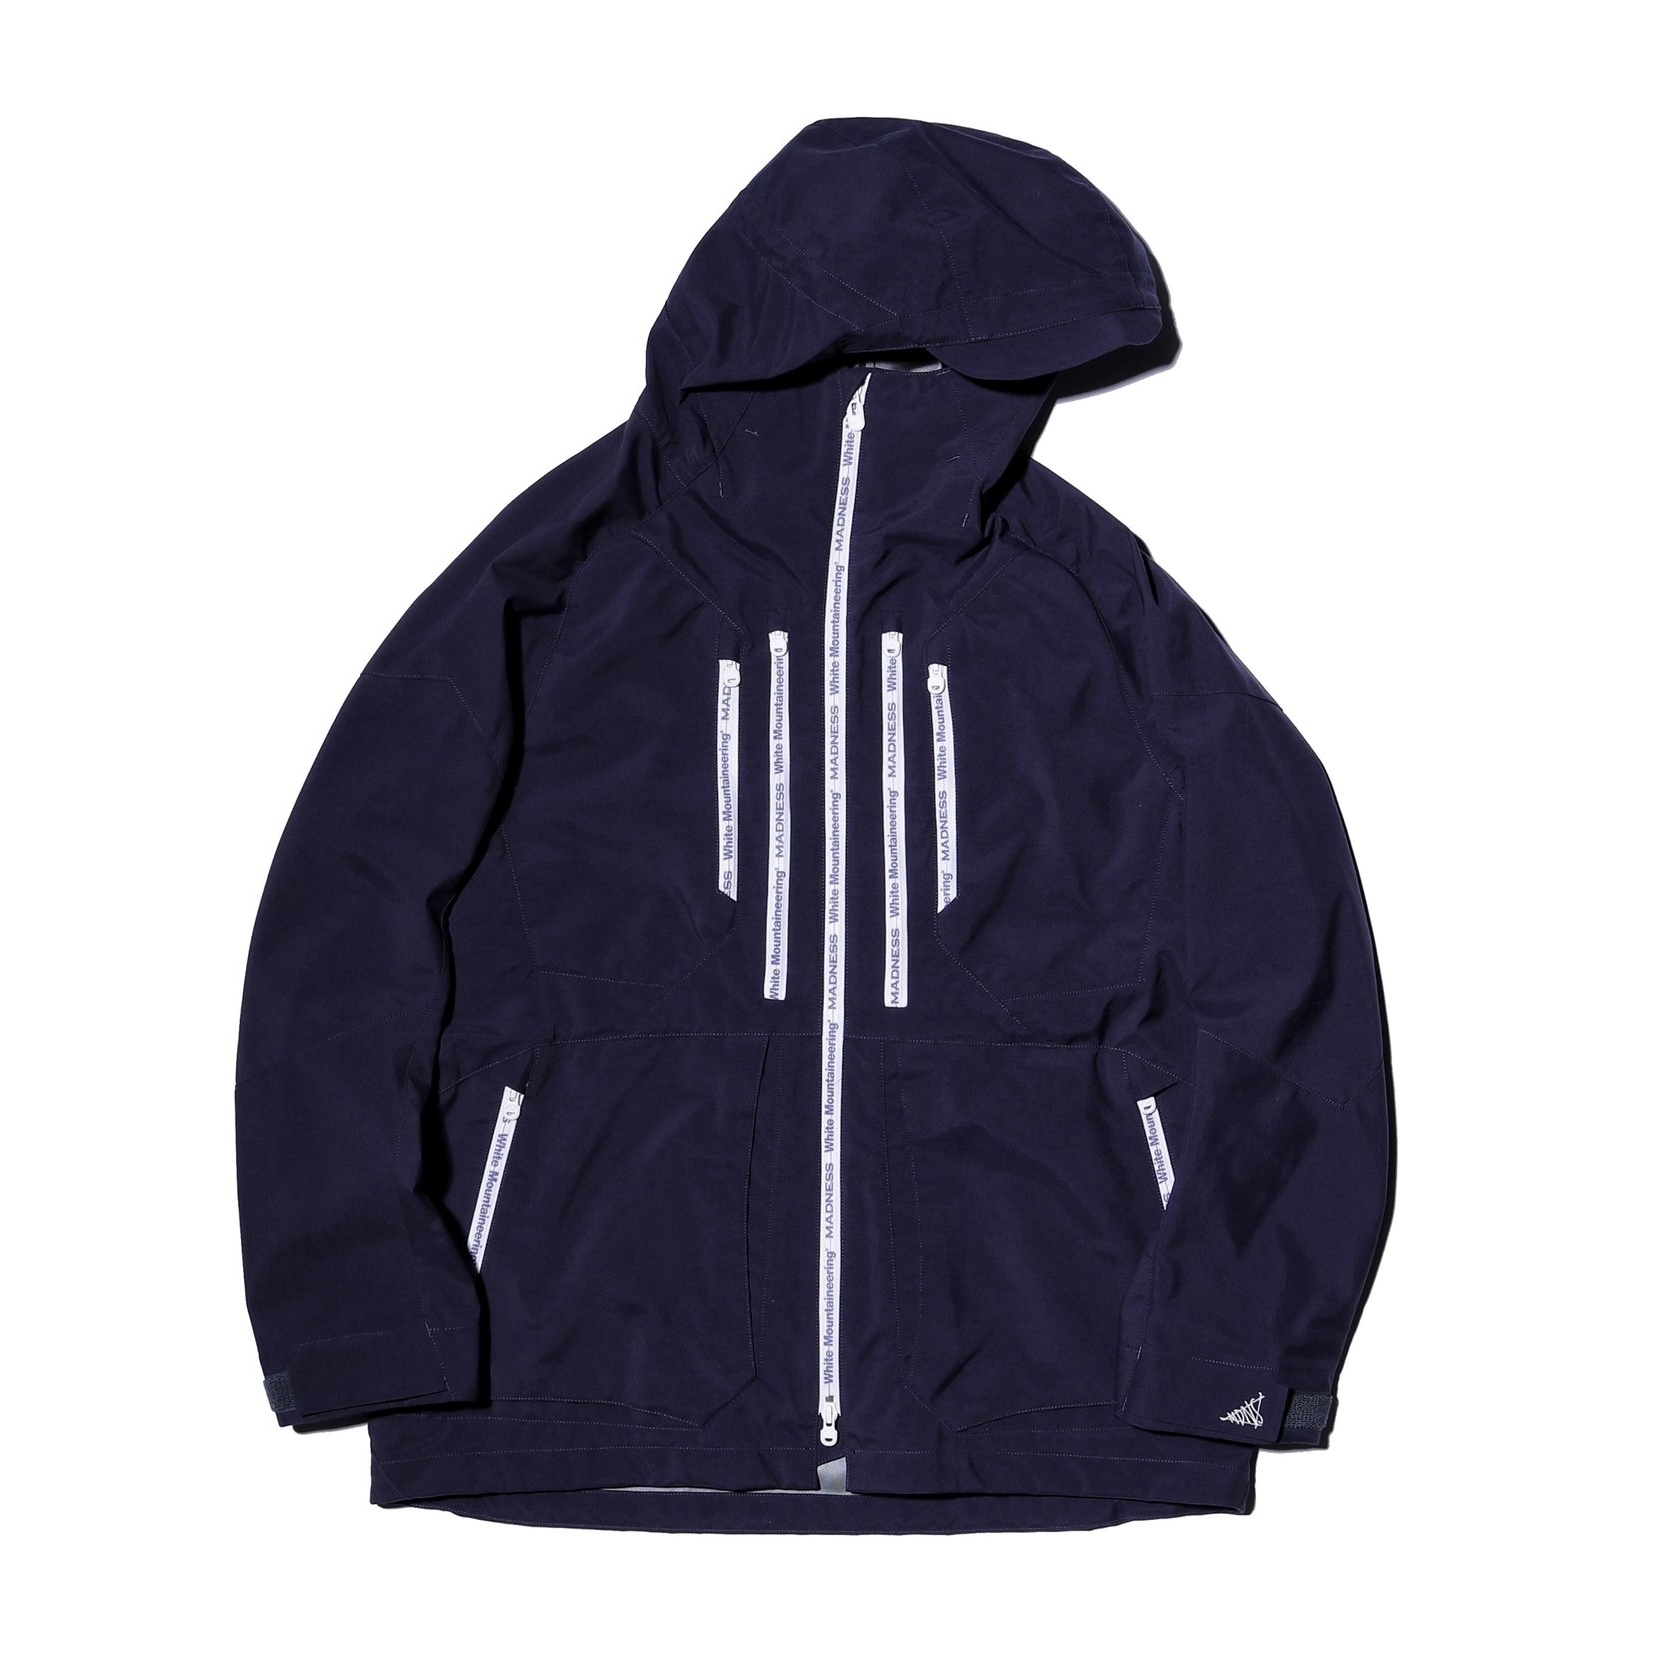 White Mountaineering celebrates MADNESS' 4th Anniversary with a special ...